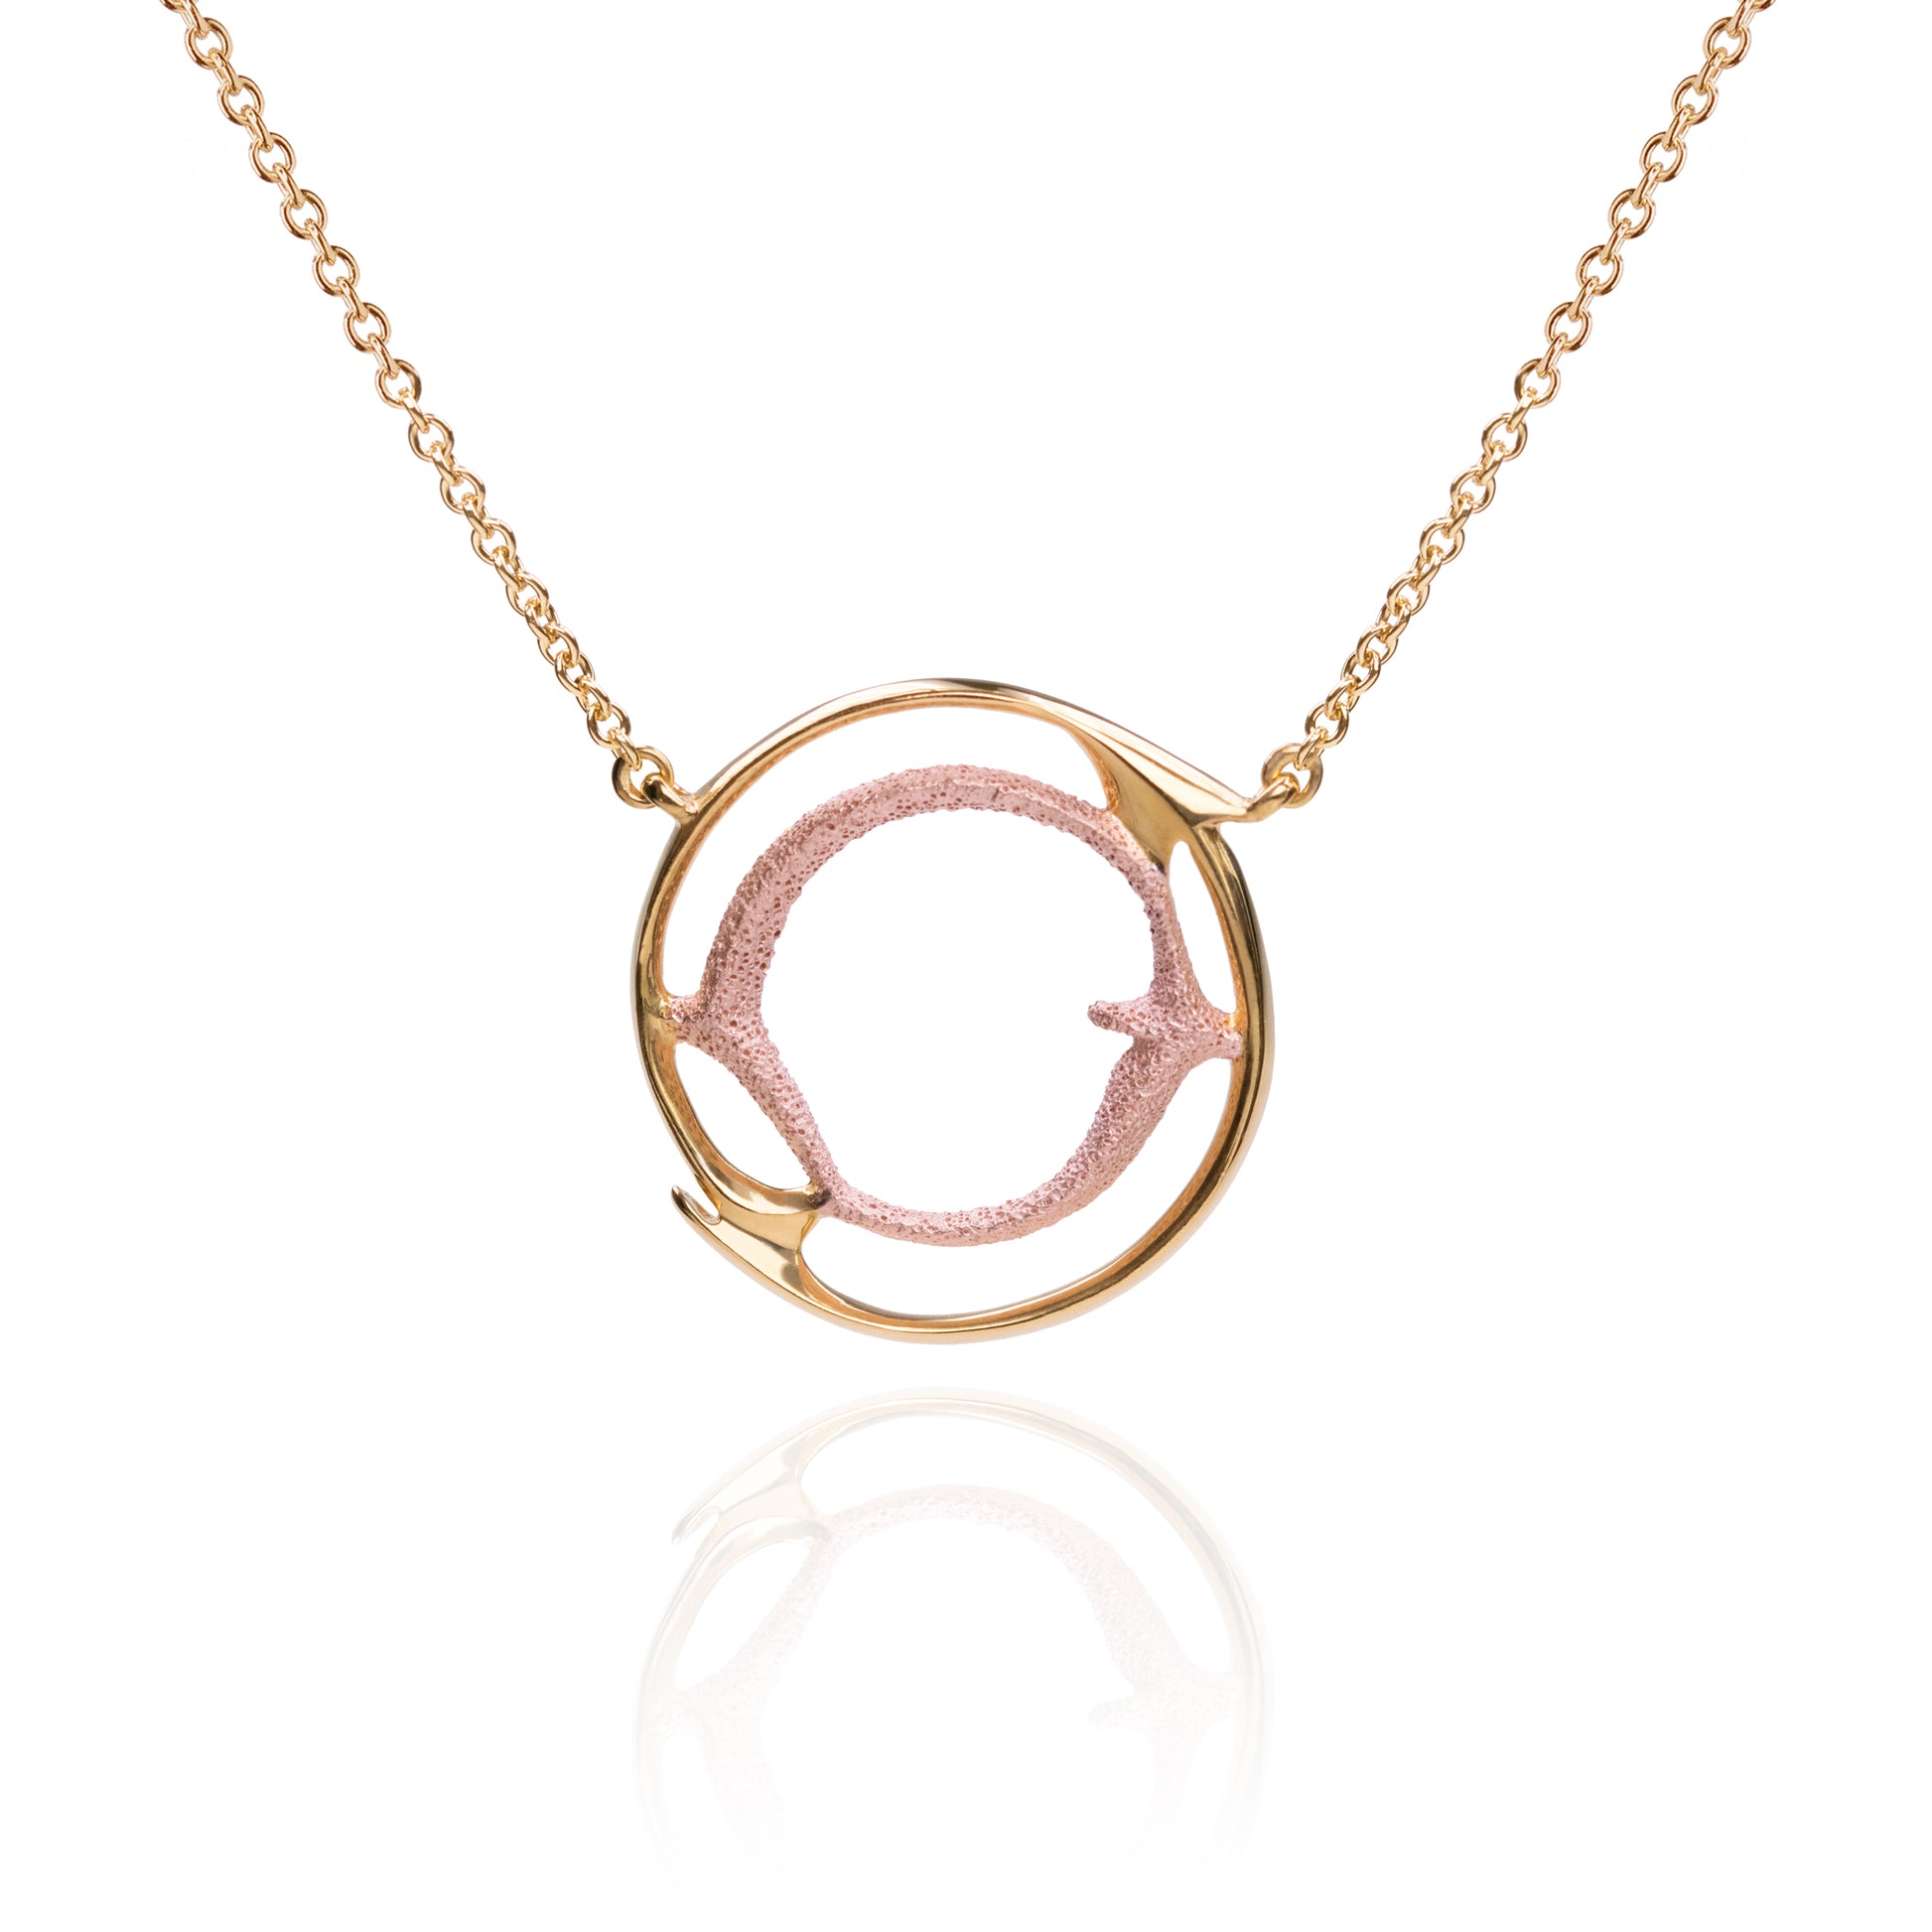 Orme-Brown Contemporary Fine Jewellery ethical medium halo pendant necklace in sustainable recycled silver and gold 